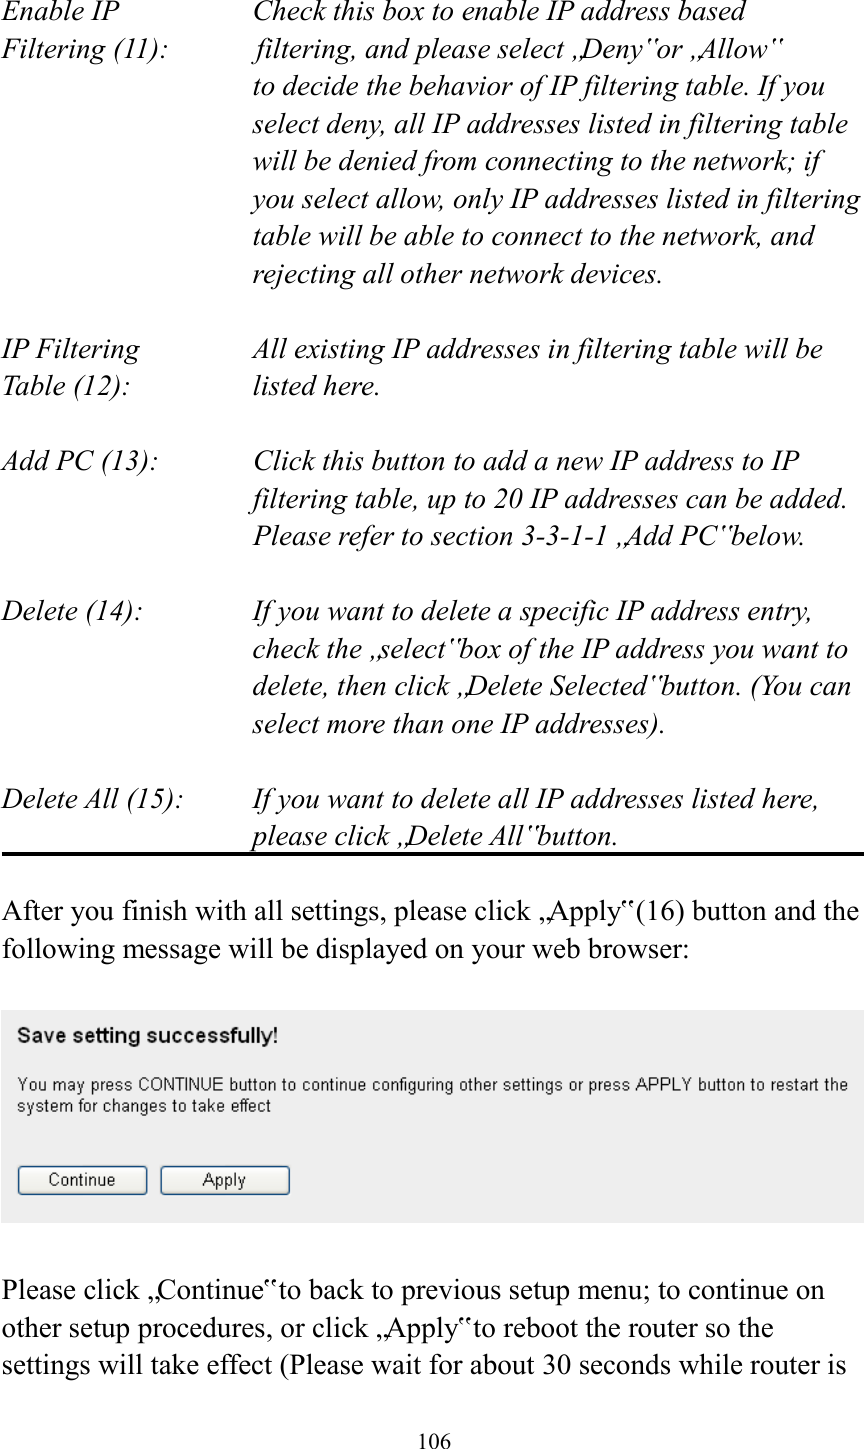  106  Enable IP        Check this box to enable IP address based Filtering (11):       filtering, and please select „Deny‟ or „Allow‟   to decide the behavior of IP filtering table. If you select deny, all IP addresses listed in filtering table will be denied from connecting to the network; if you select allow, only IP addresses listed in filtering table will be able to connect to the network, and rejecting all other network devices.  IP Filtering      All existing IP addresses in filtering table will be Table (12):       listed here.  Add PC (13):    Click this button to add a new IP address to IP filtering table, up to 20 IP addresses can be added.   Please refer to section 3-3-1-1 „Add PC‟ below.    Delete (14):      If you want to delete a specific IP address entry,     check the „select‟ box of the IP address you want to delete, then click „Delete Selected‟ button. (You can select more than one IP addresses).  Delete All (15):    If you want to delete all IP addresses listed here, please click „Delete All‟ button.  After you finish with all settings, please click „Apply‟ (16) button and the following message will be displayed on your web browser:    Please click „Continue‟ to back to previous setup menu; to continue on other setup procedures, or click „Apply‟ to reboot the router so the settings will take effect (Please wait for about 30 seconds while router is 